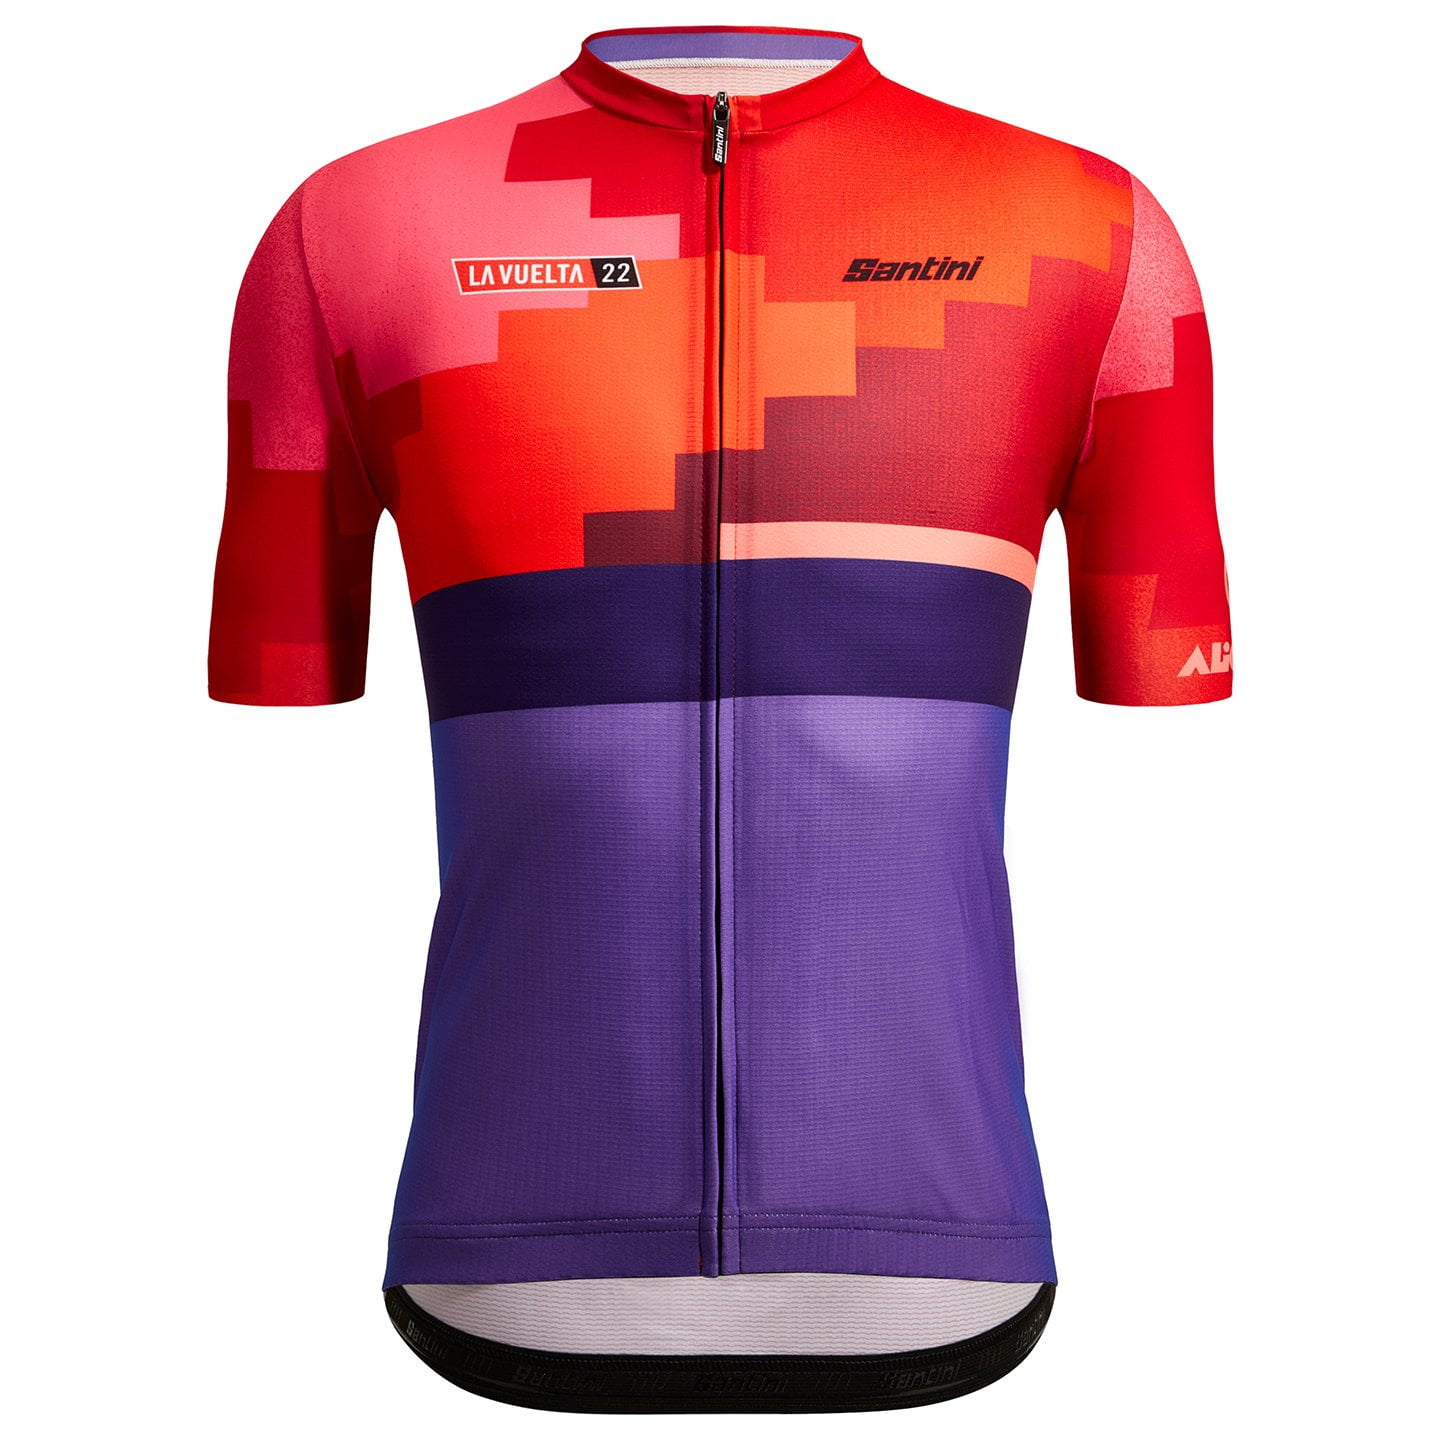 LA VUELTA Alicante 2022 Short Sleeve Jersey, for men, size M, Cycle jersey, Cycling clothing